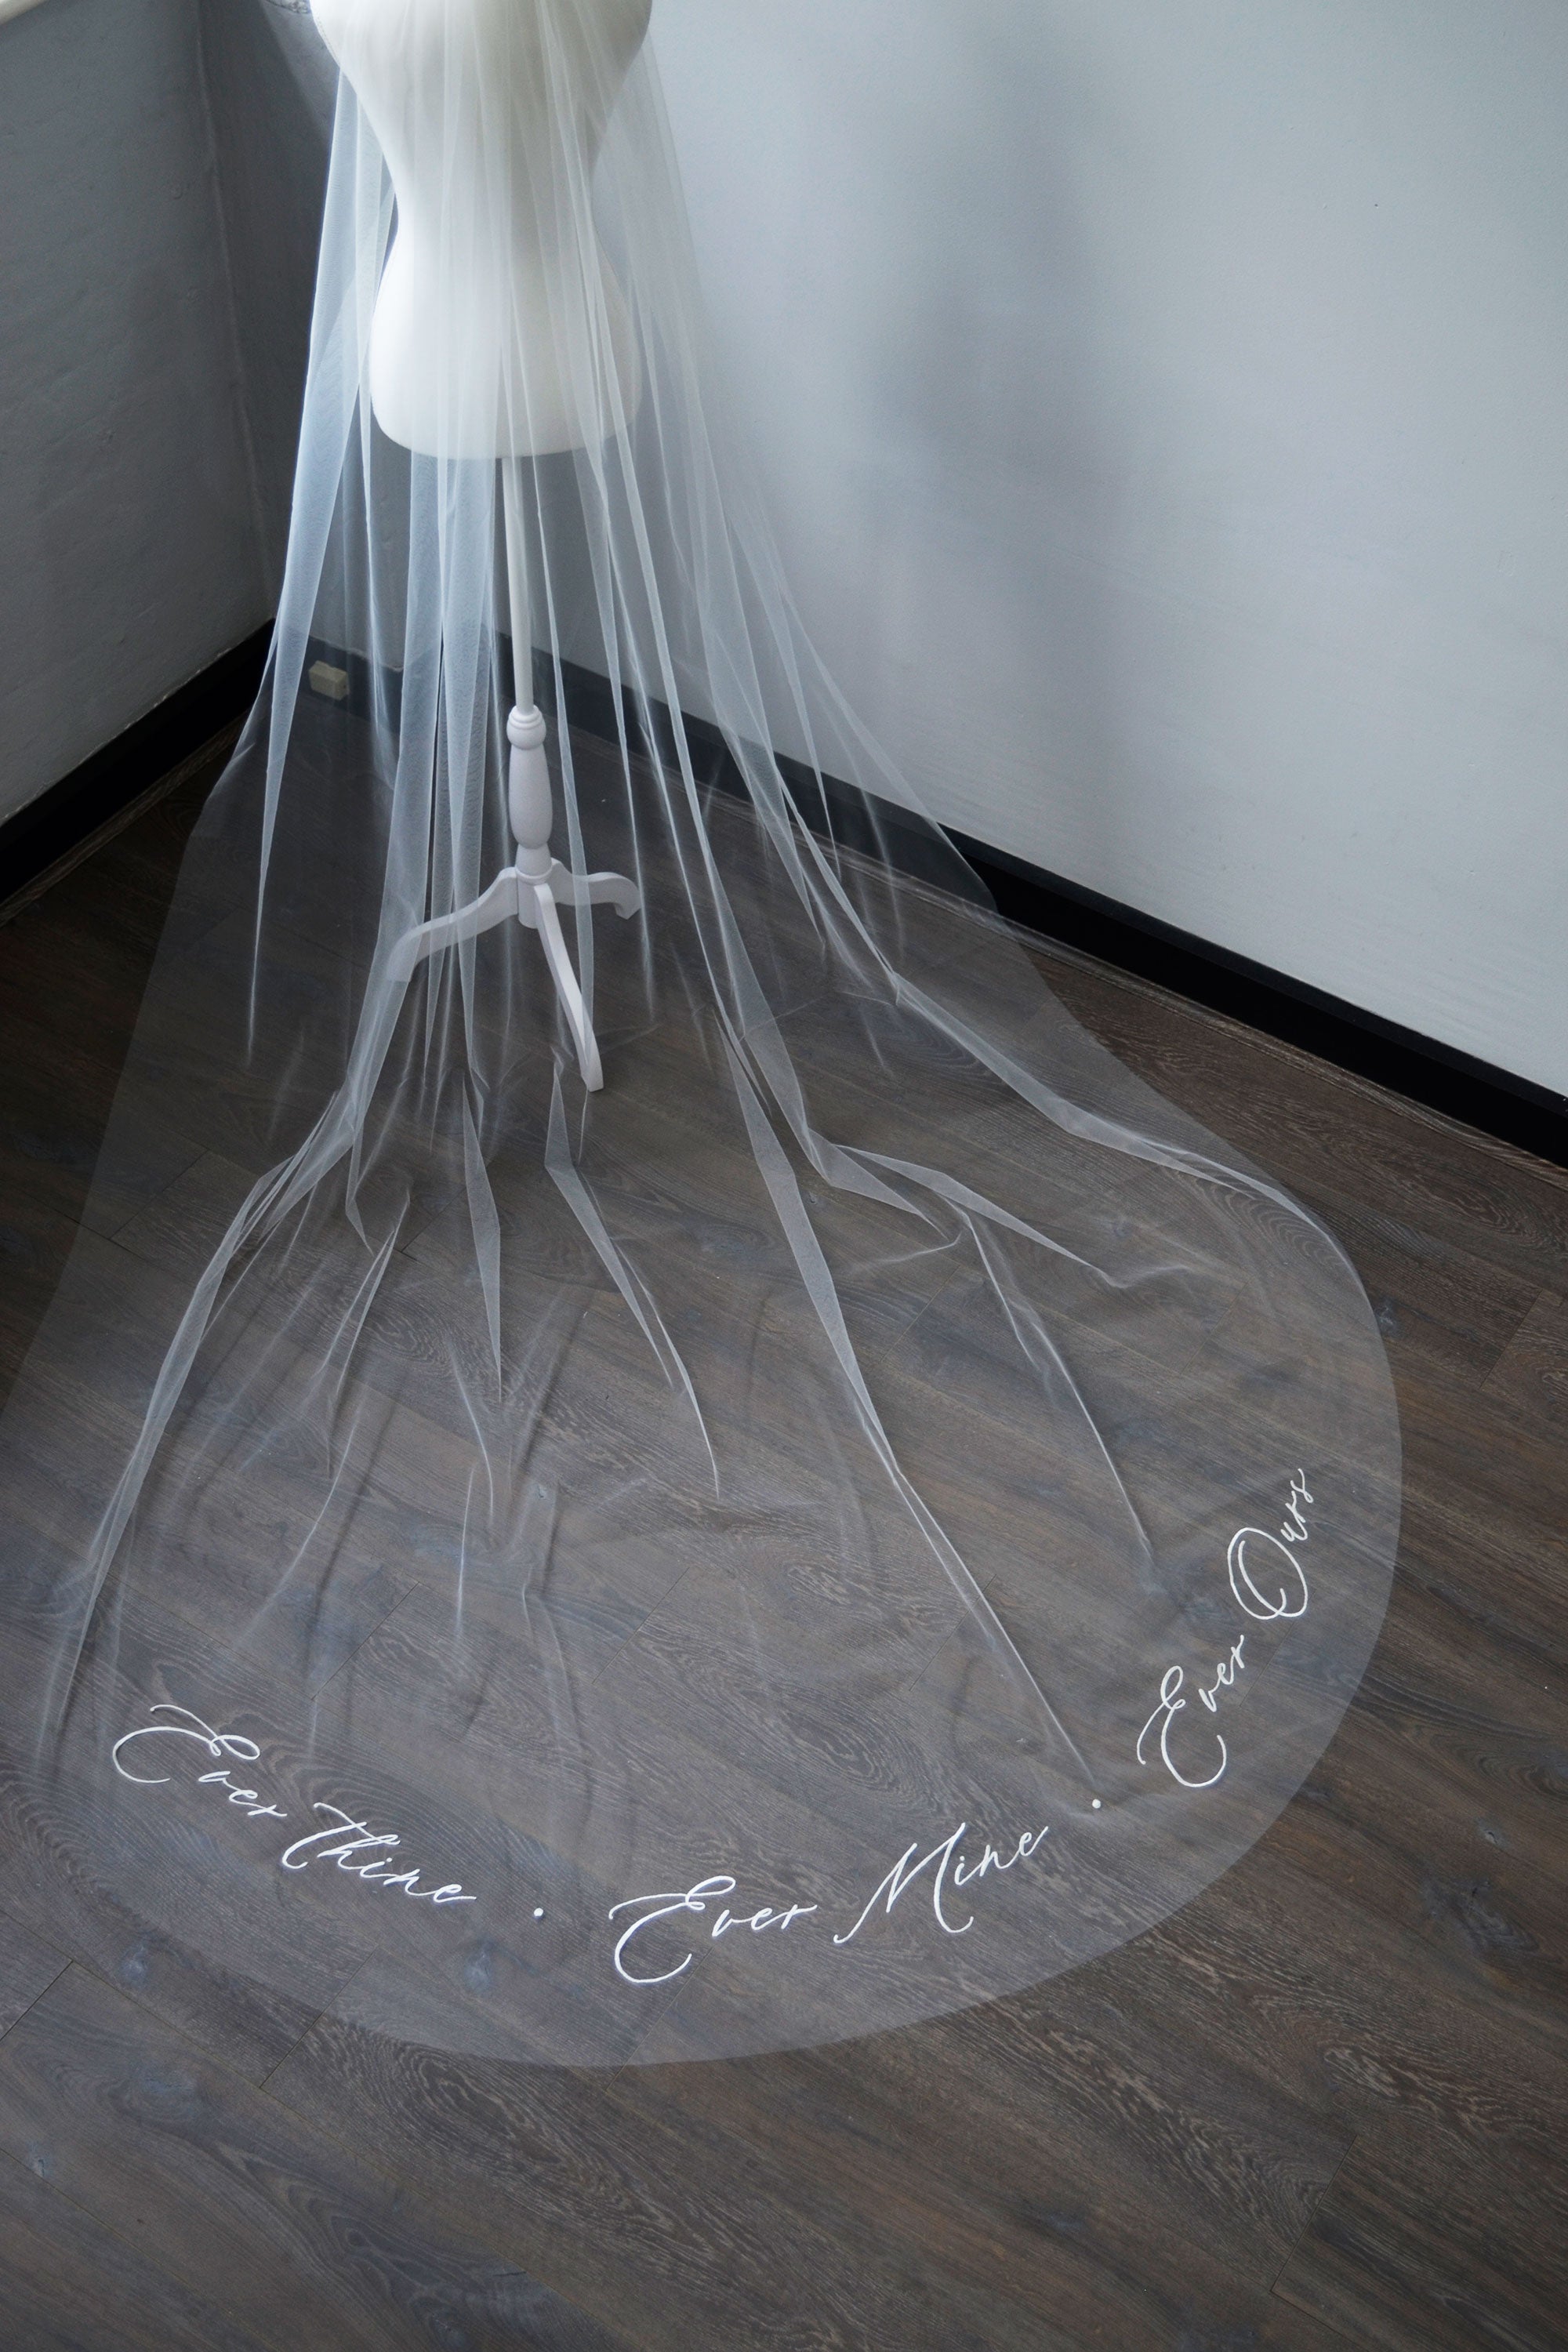 A wedding veil with embroidery text ever thine, ever mine, ever ours